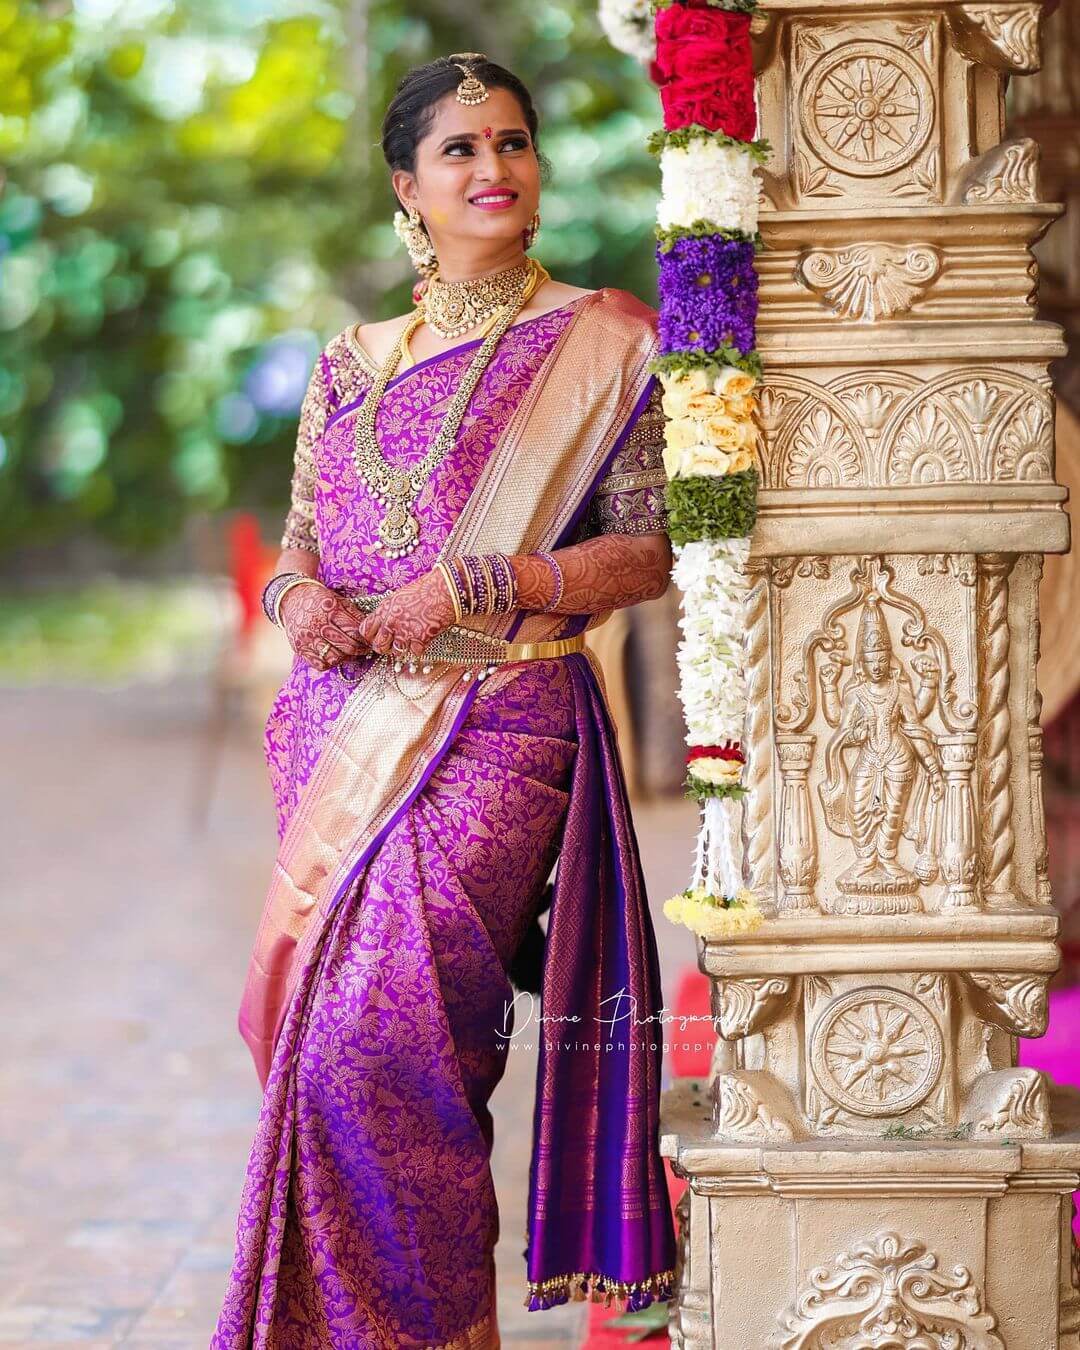 Violet with gold magic in the saree